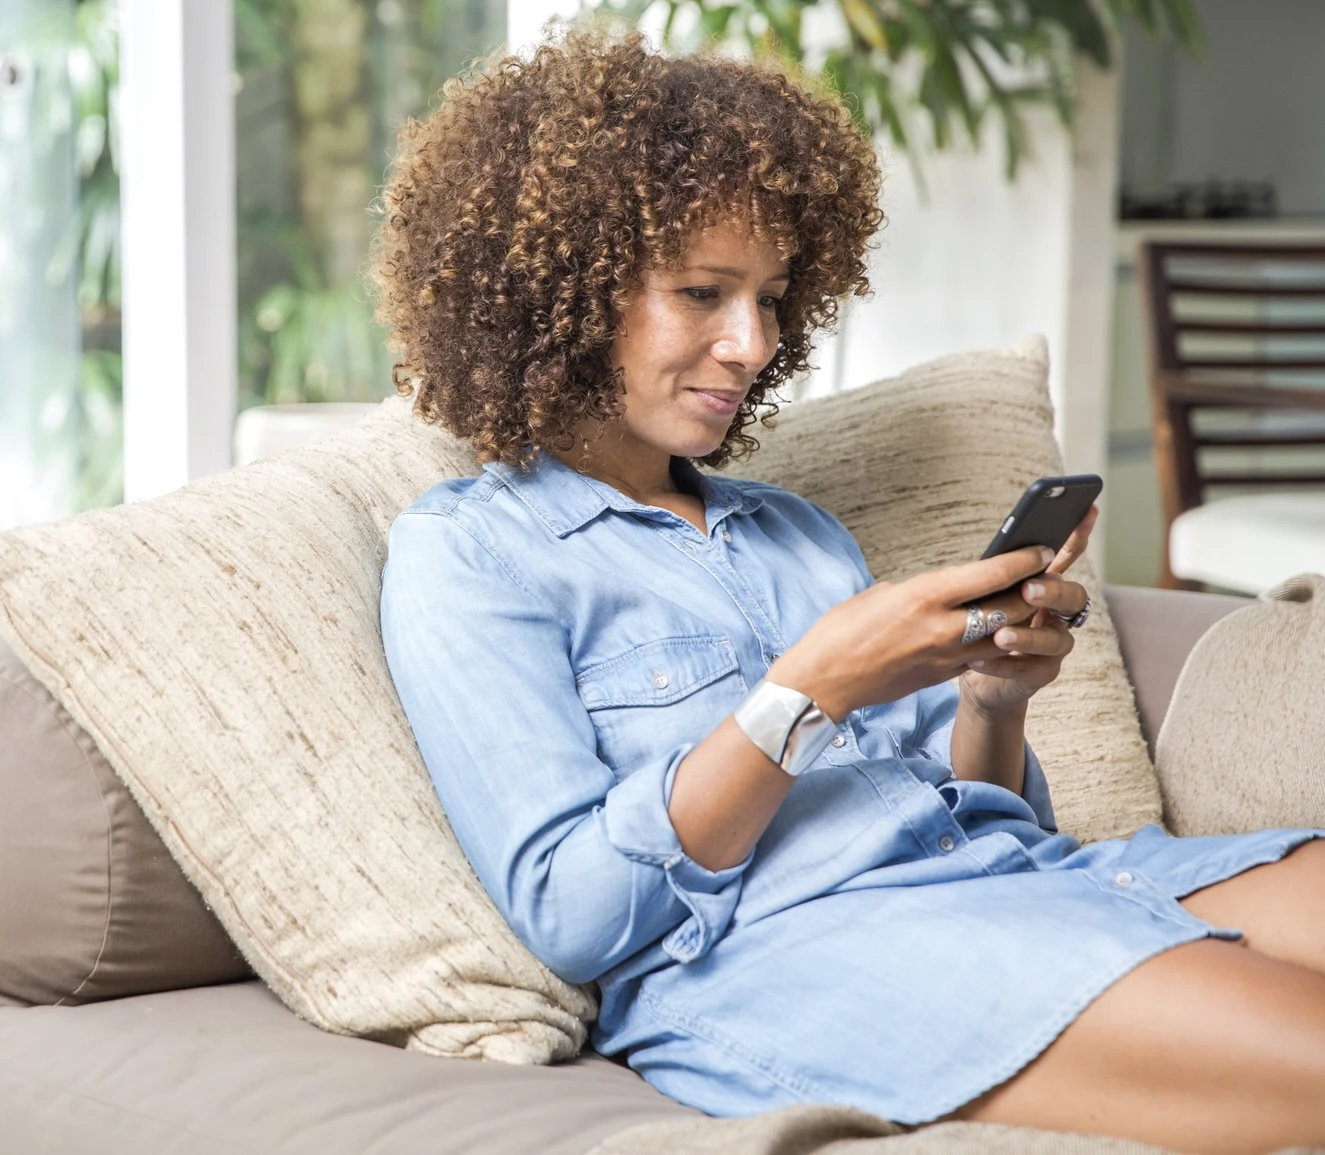 Woman leisurely sitting on couch looking at phone